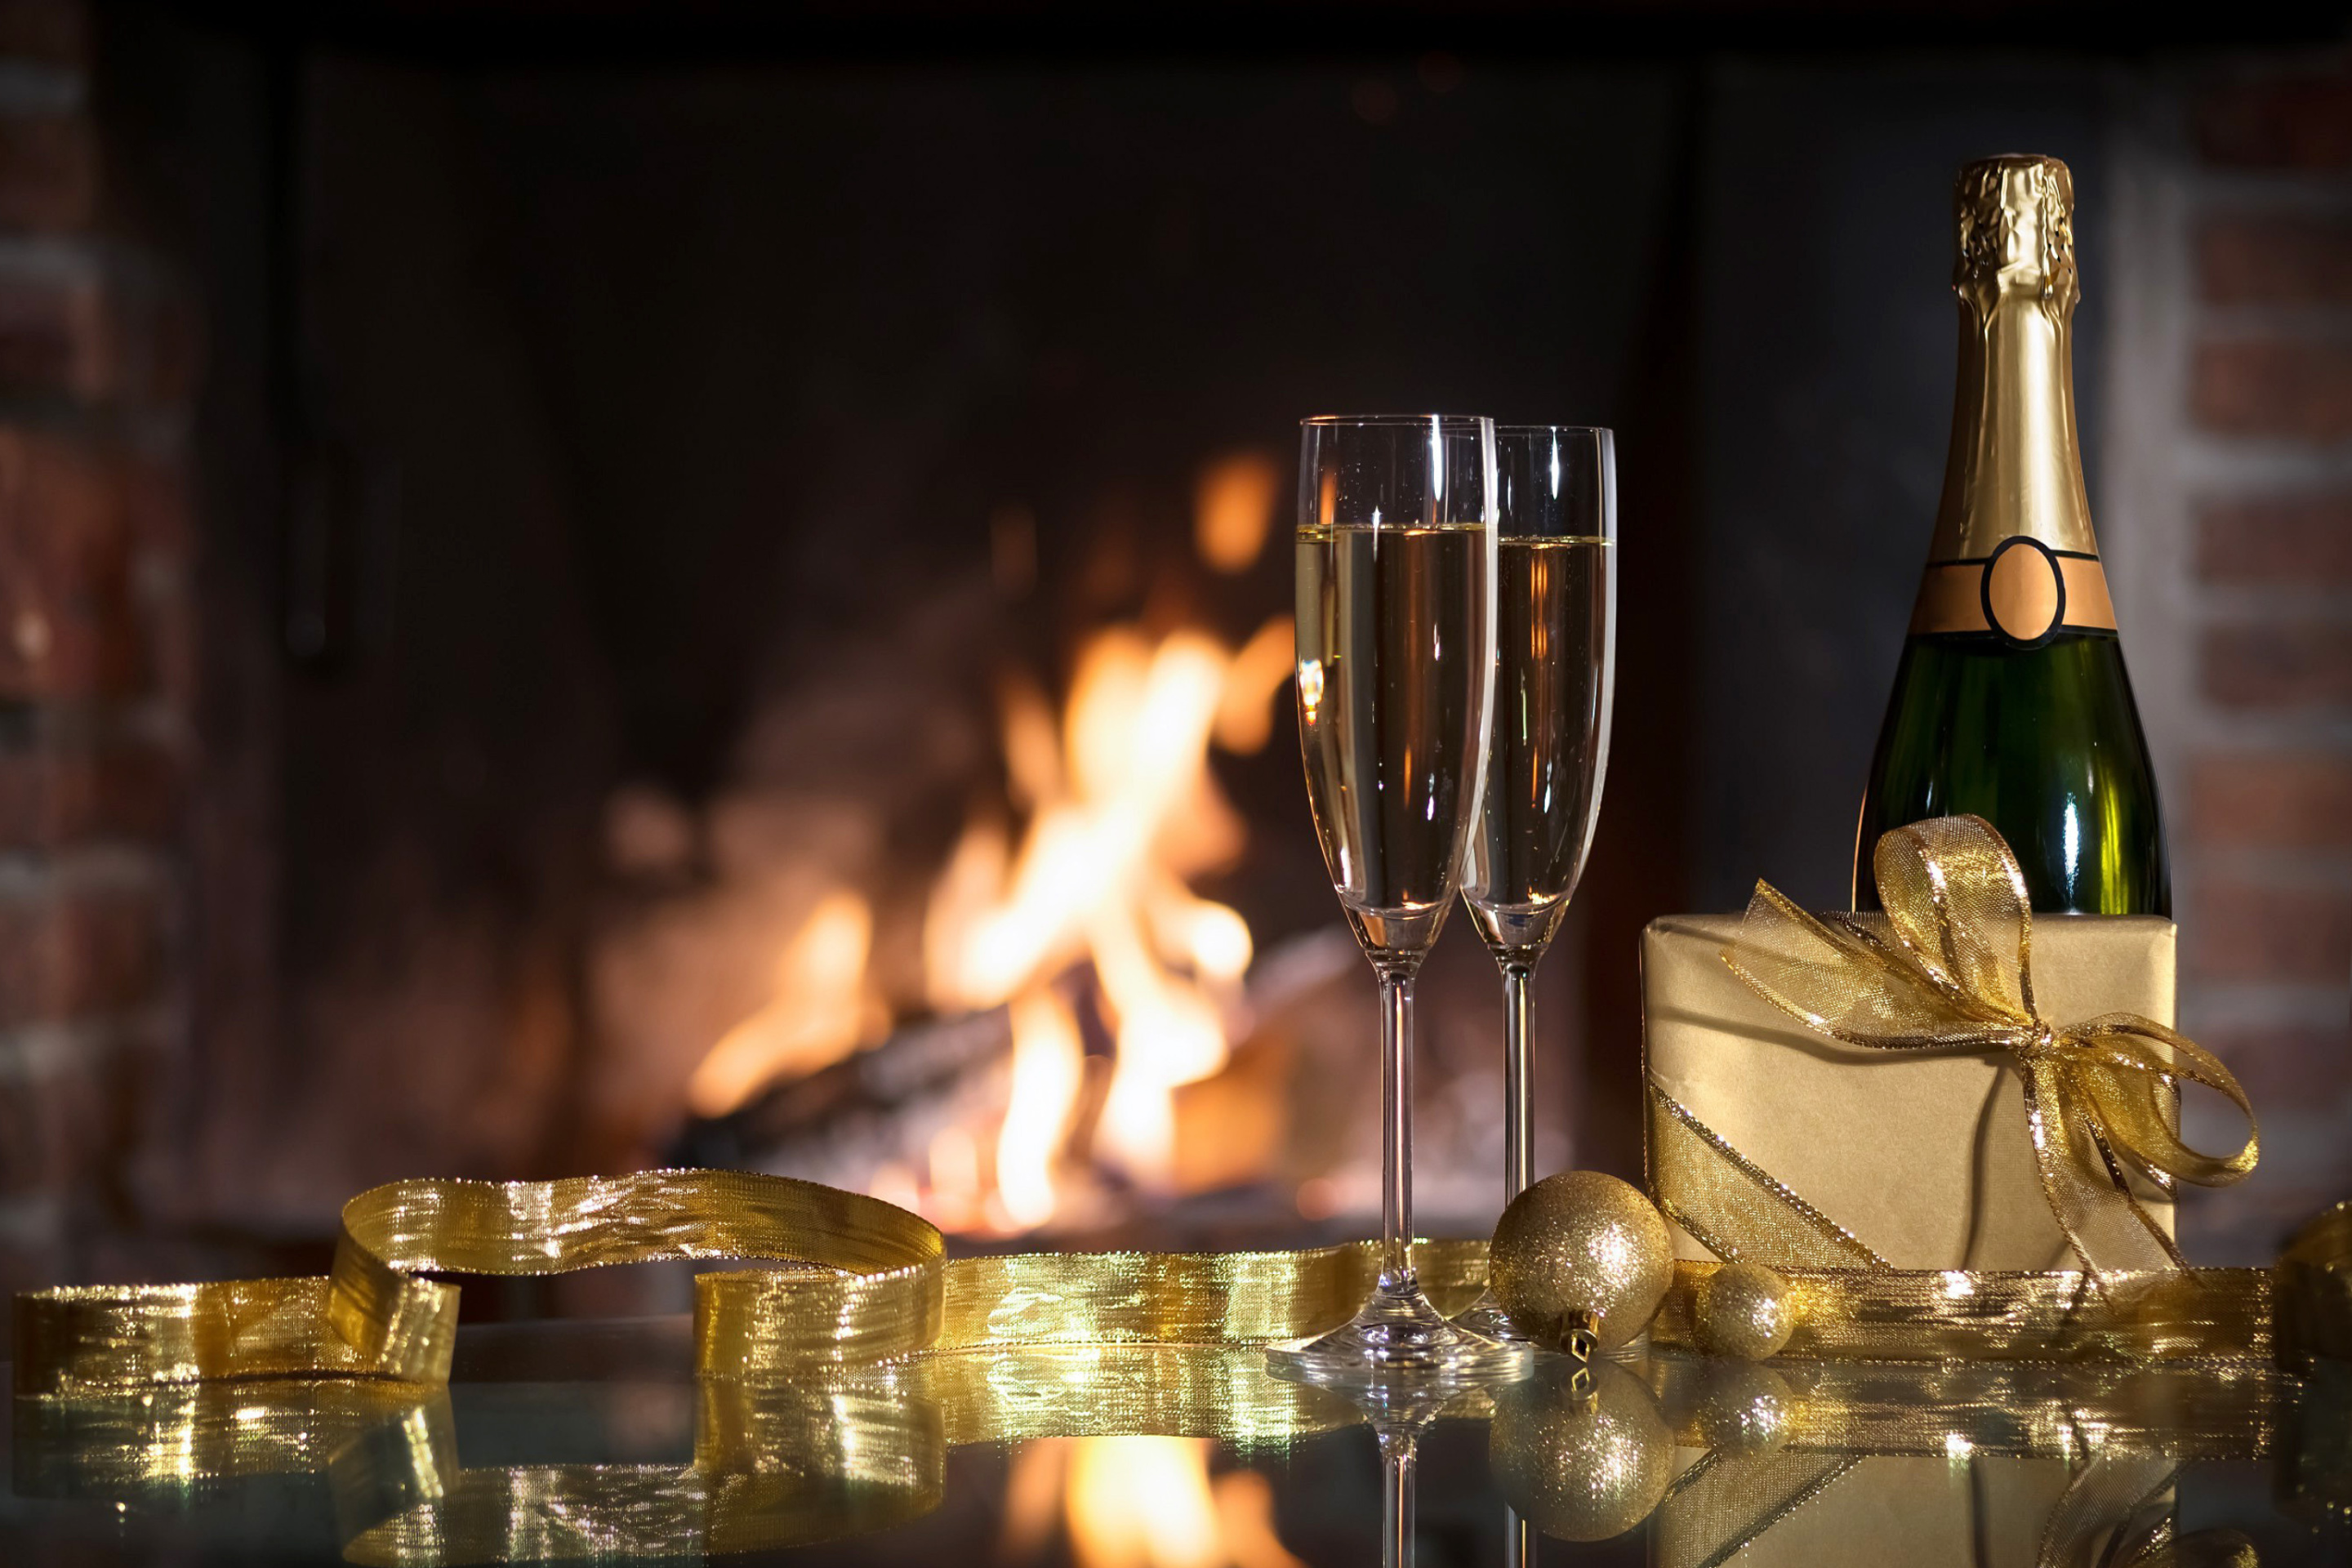 Champagne and Fireplace wallpaper 2880x1920